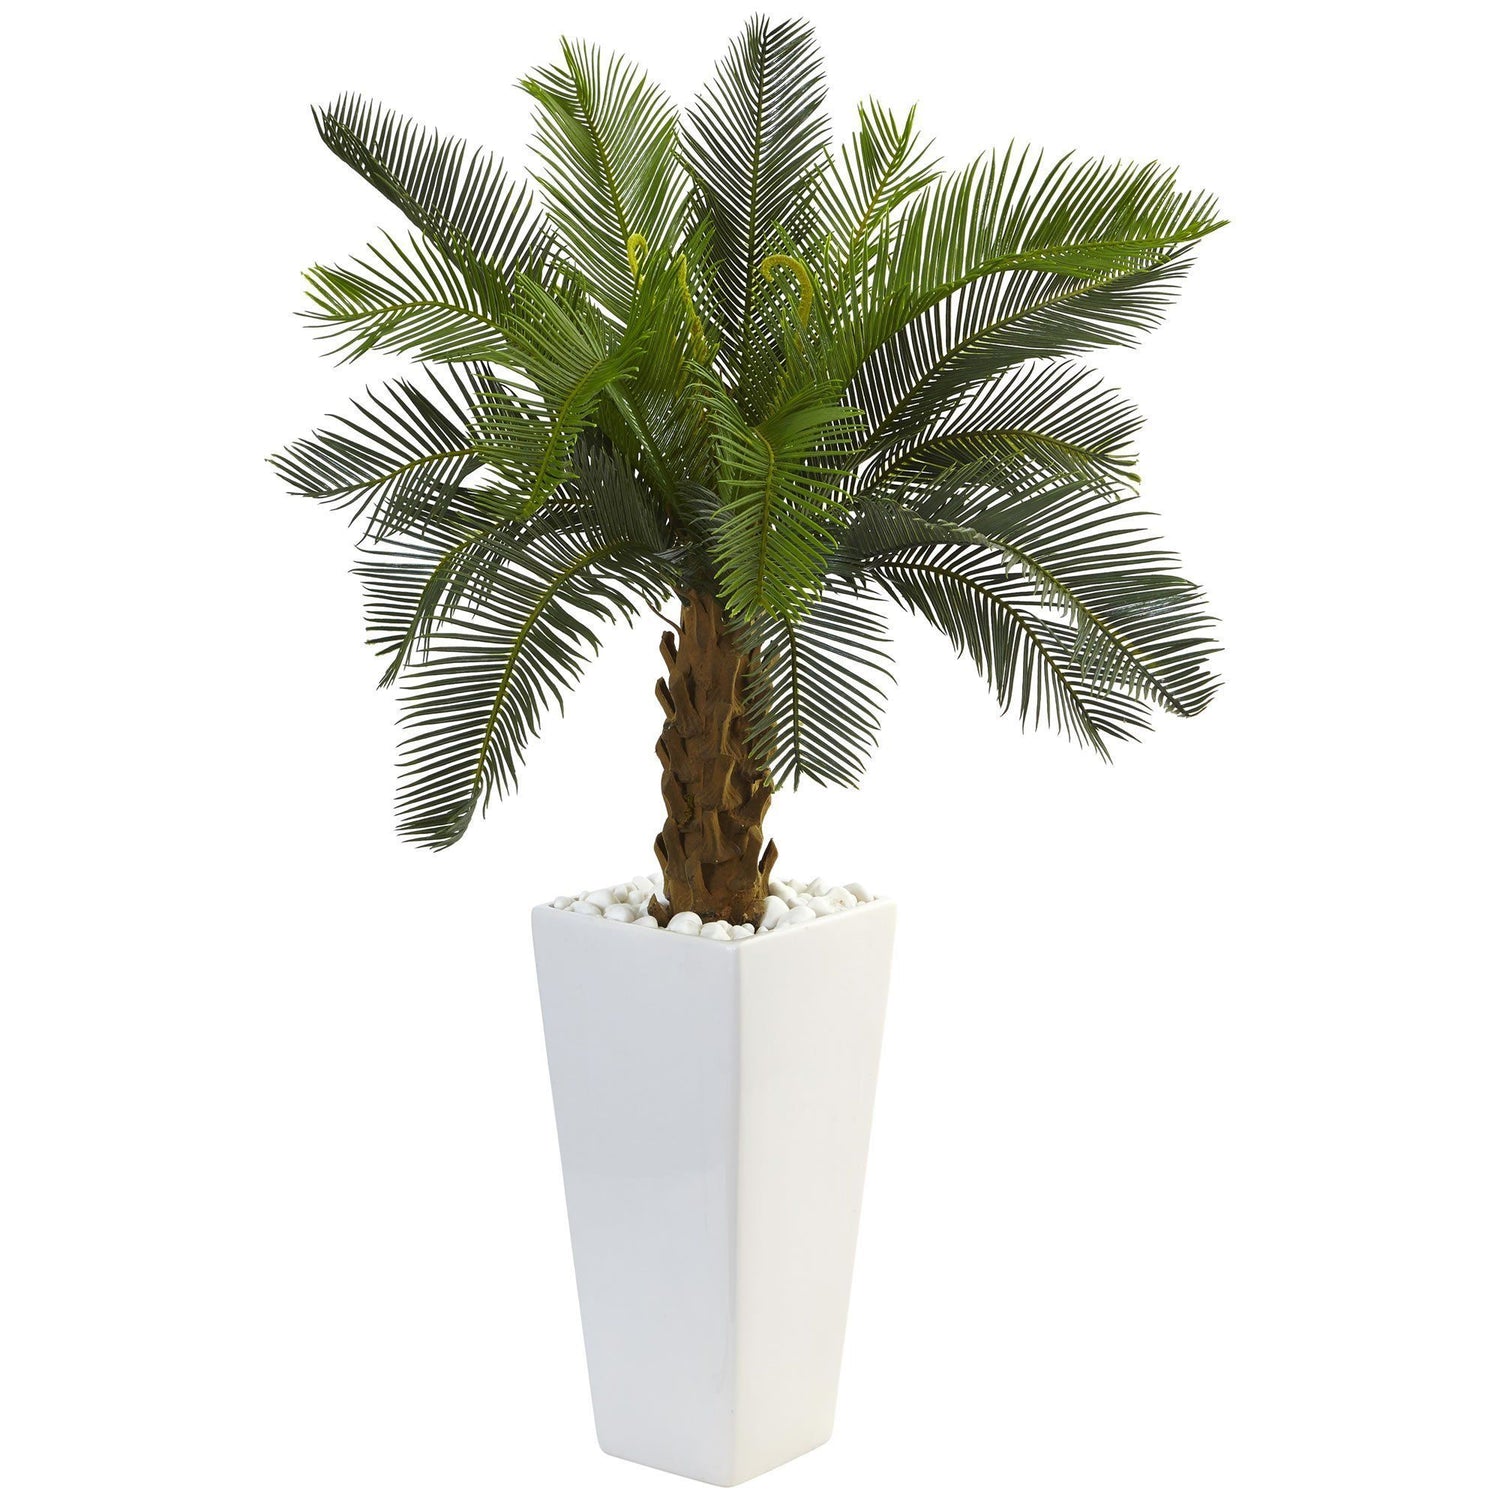 3’ Cycas Tree in White Tower Planter